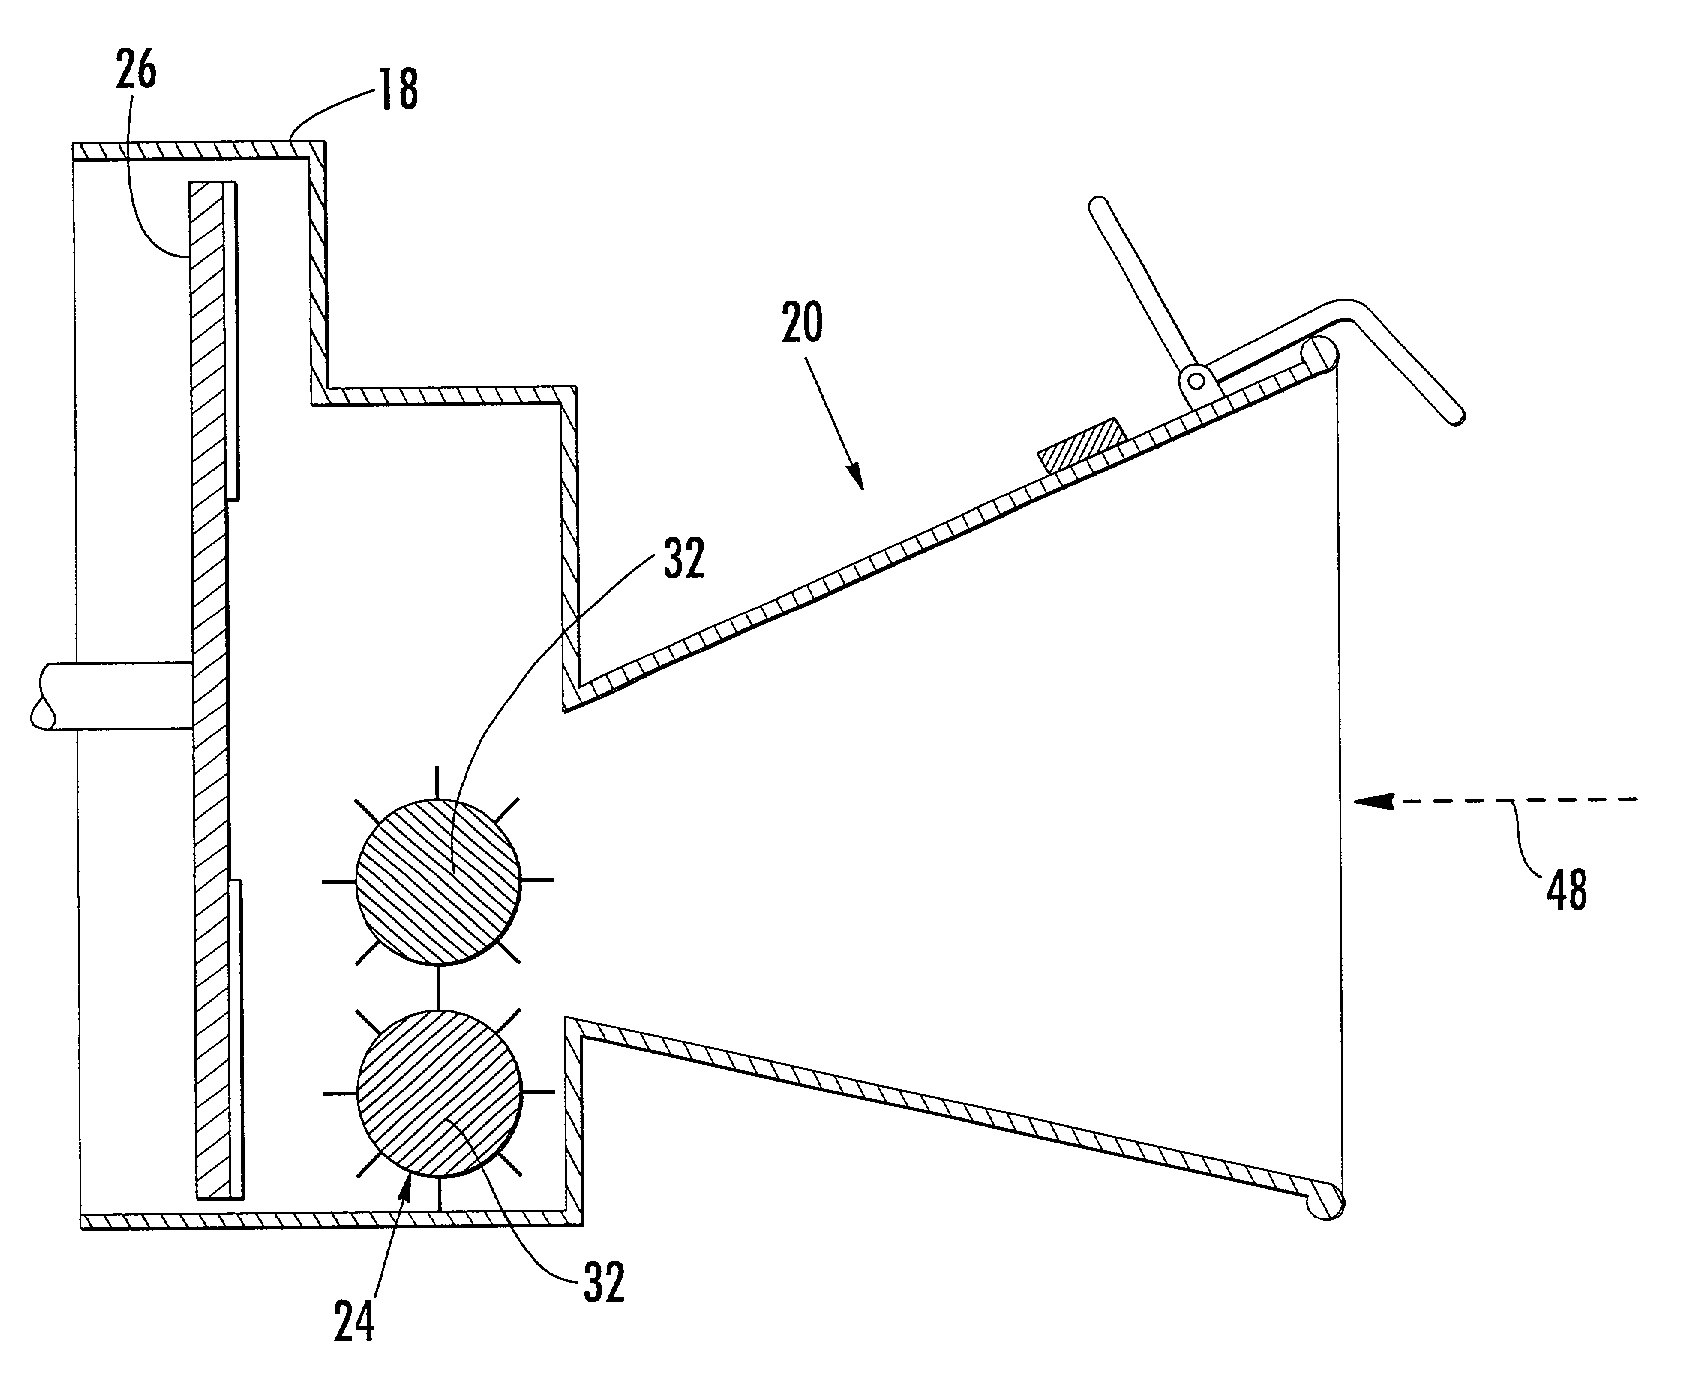 Wood chipper having an infeed chute safety device